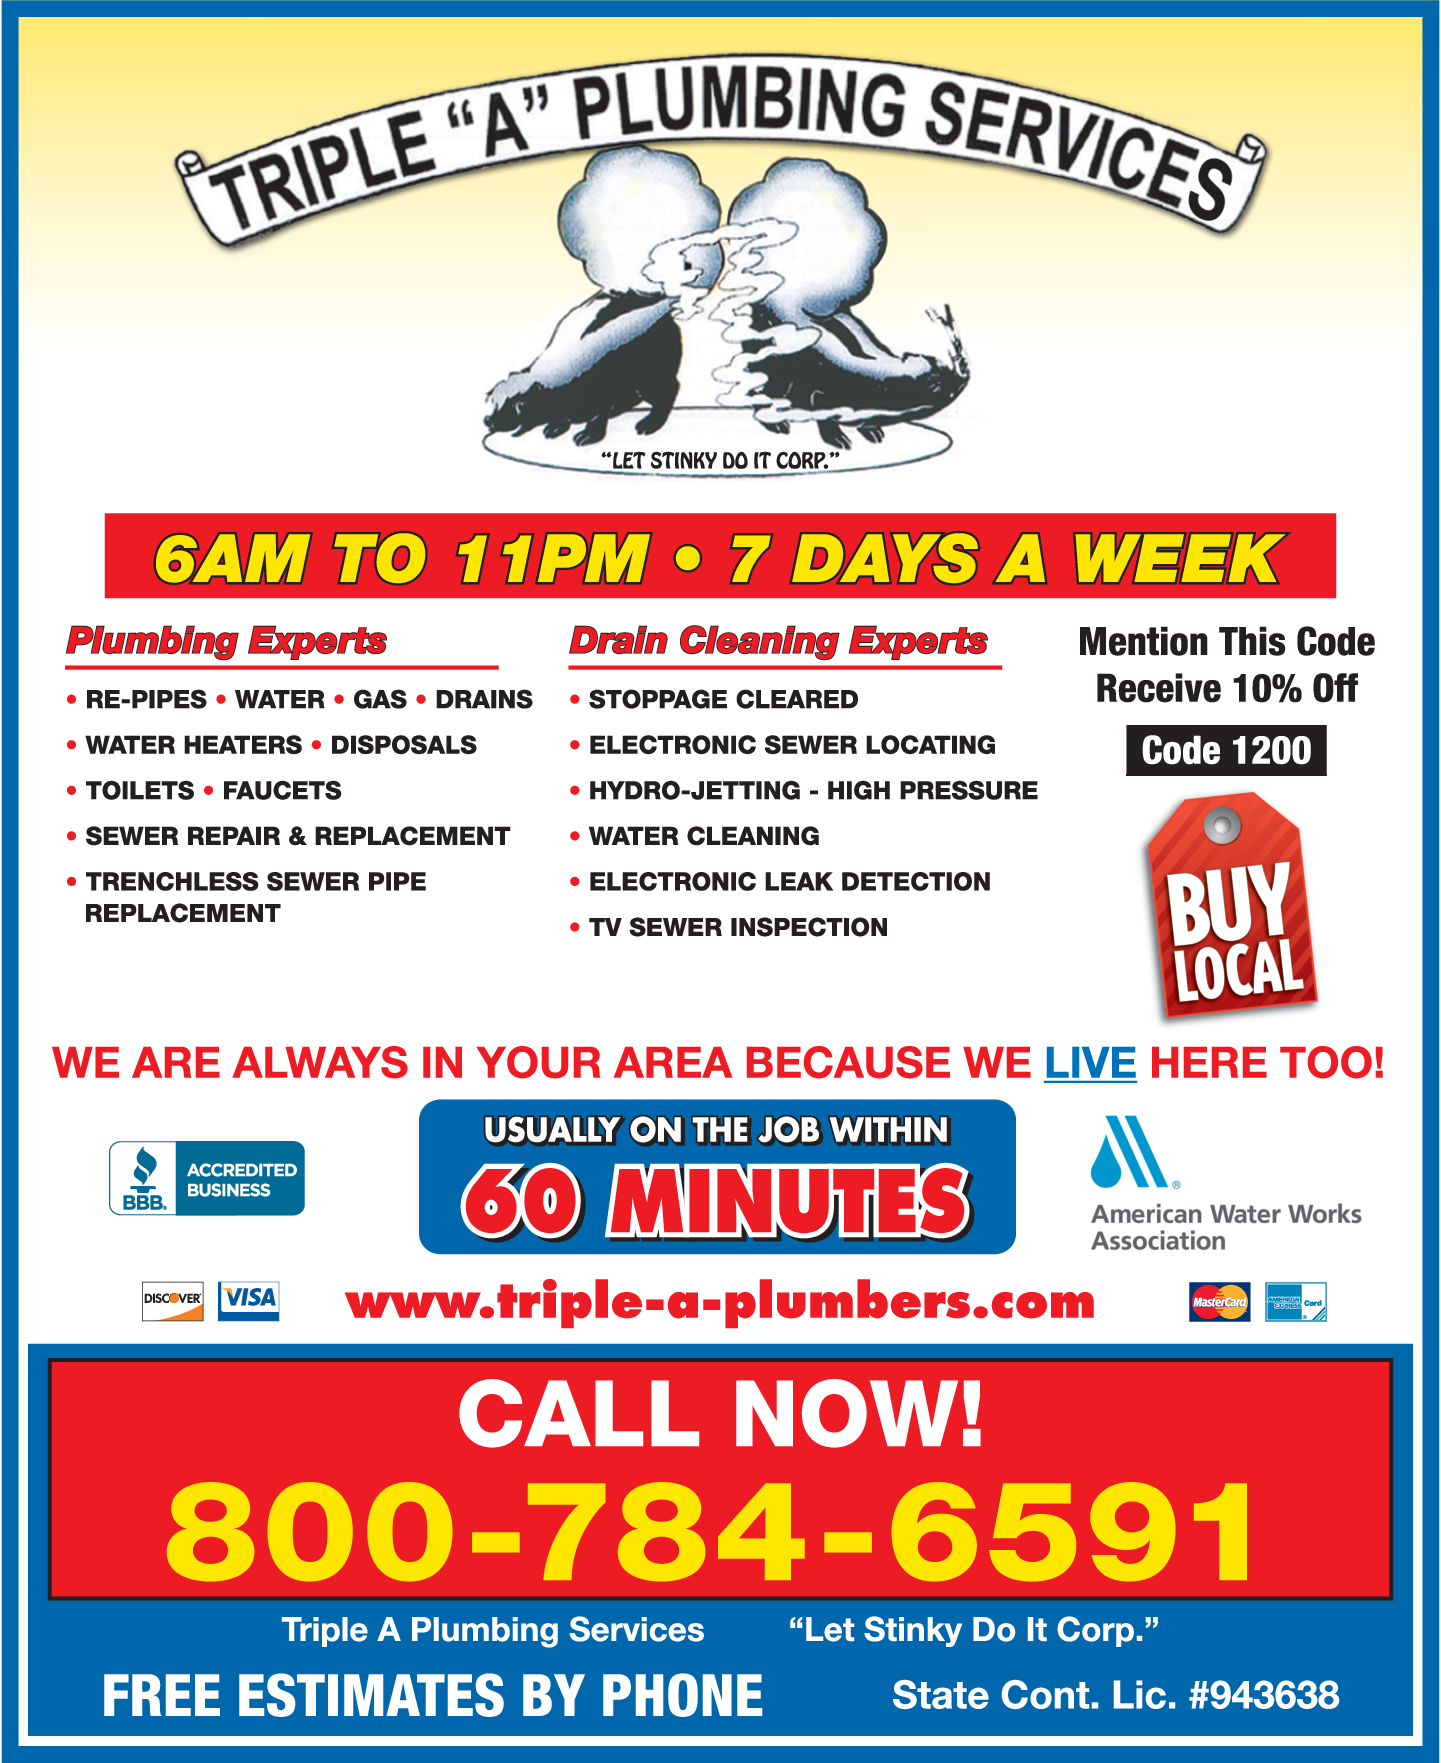 Triple A Plumbing Services